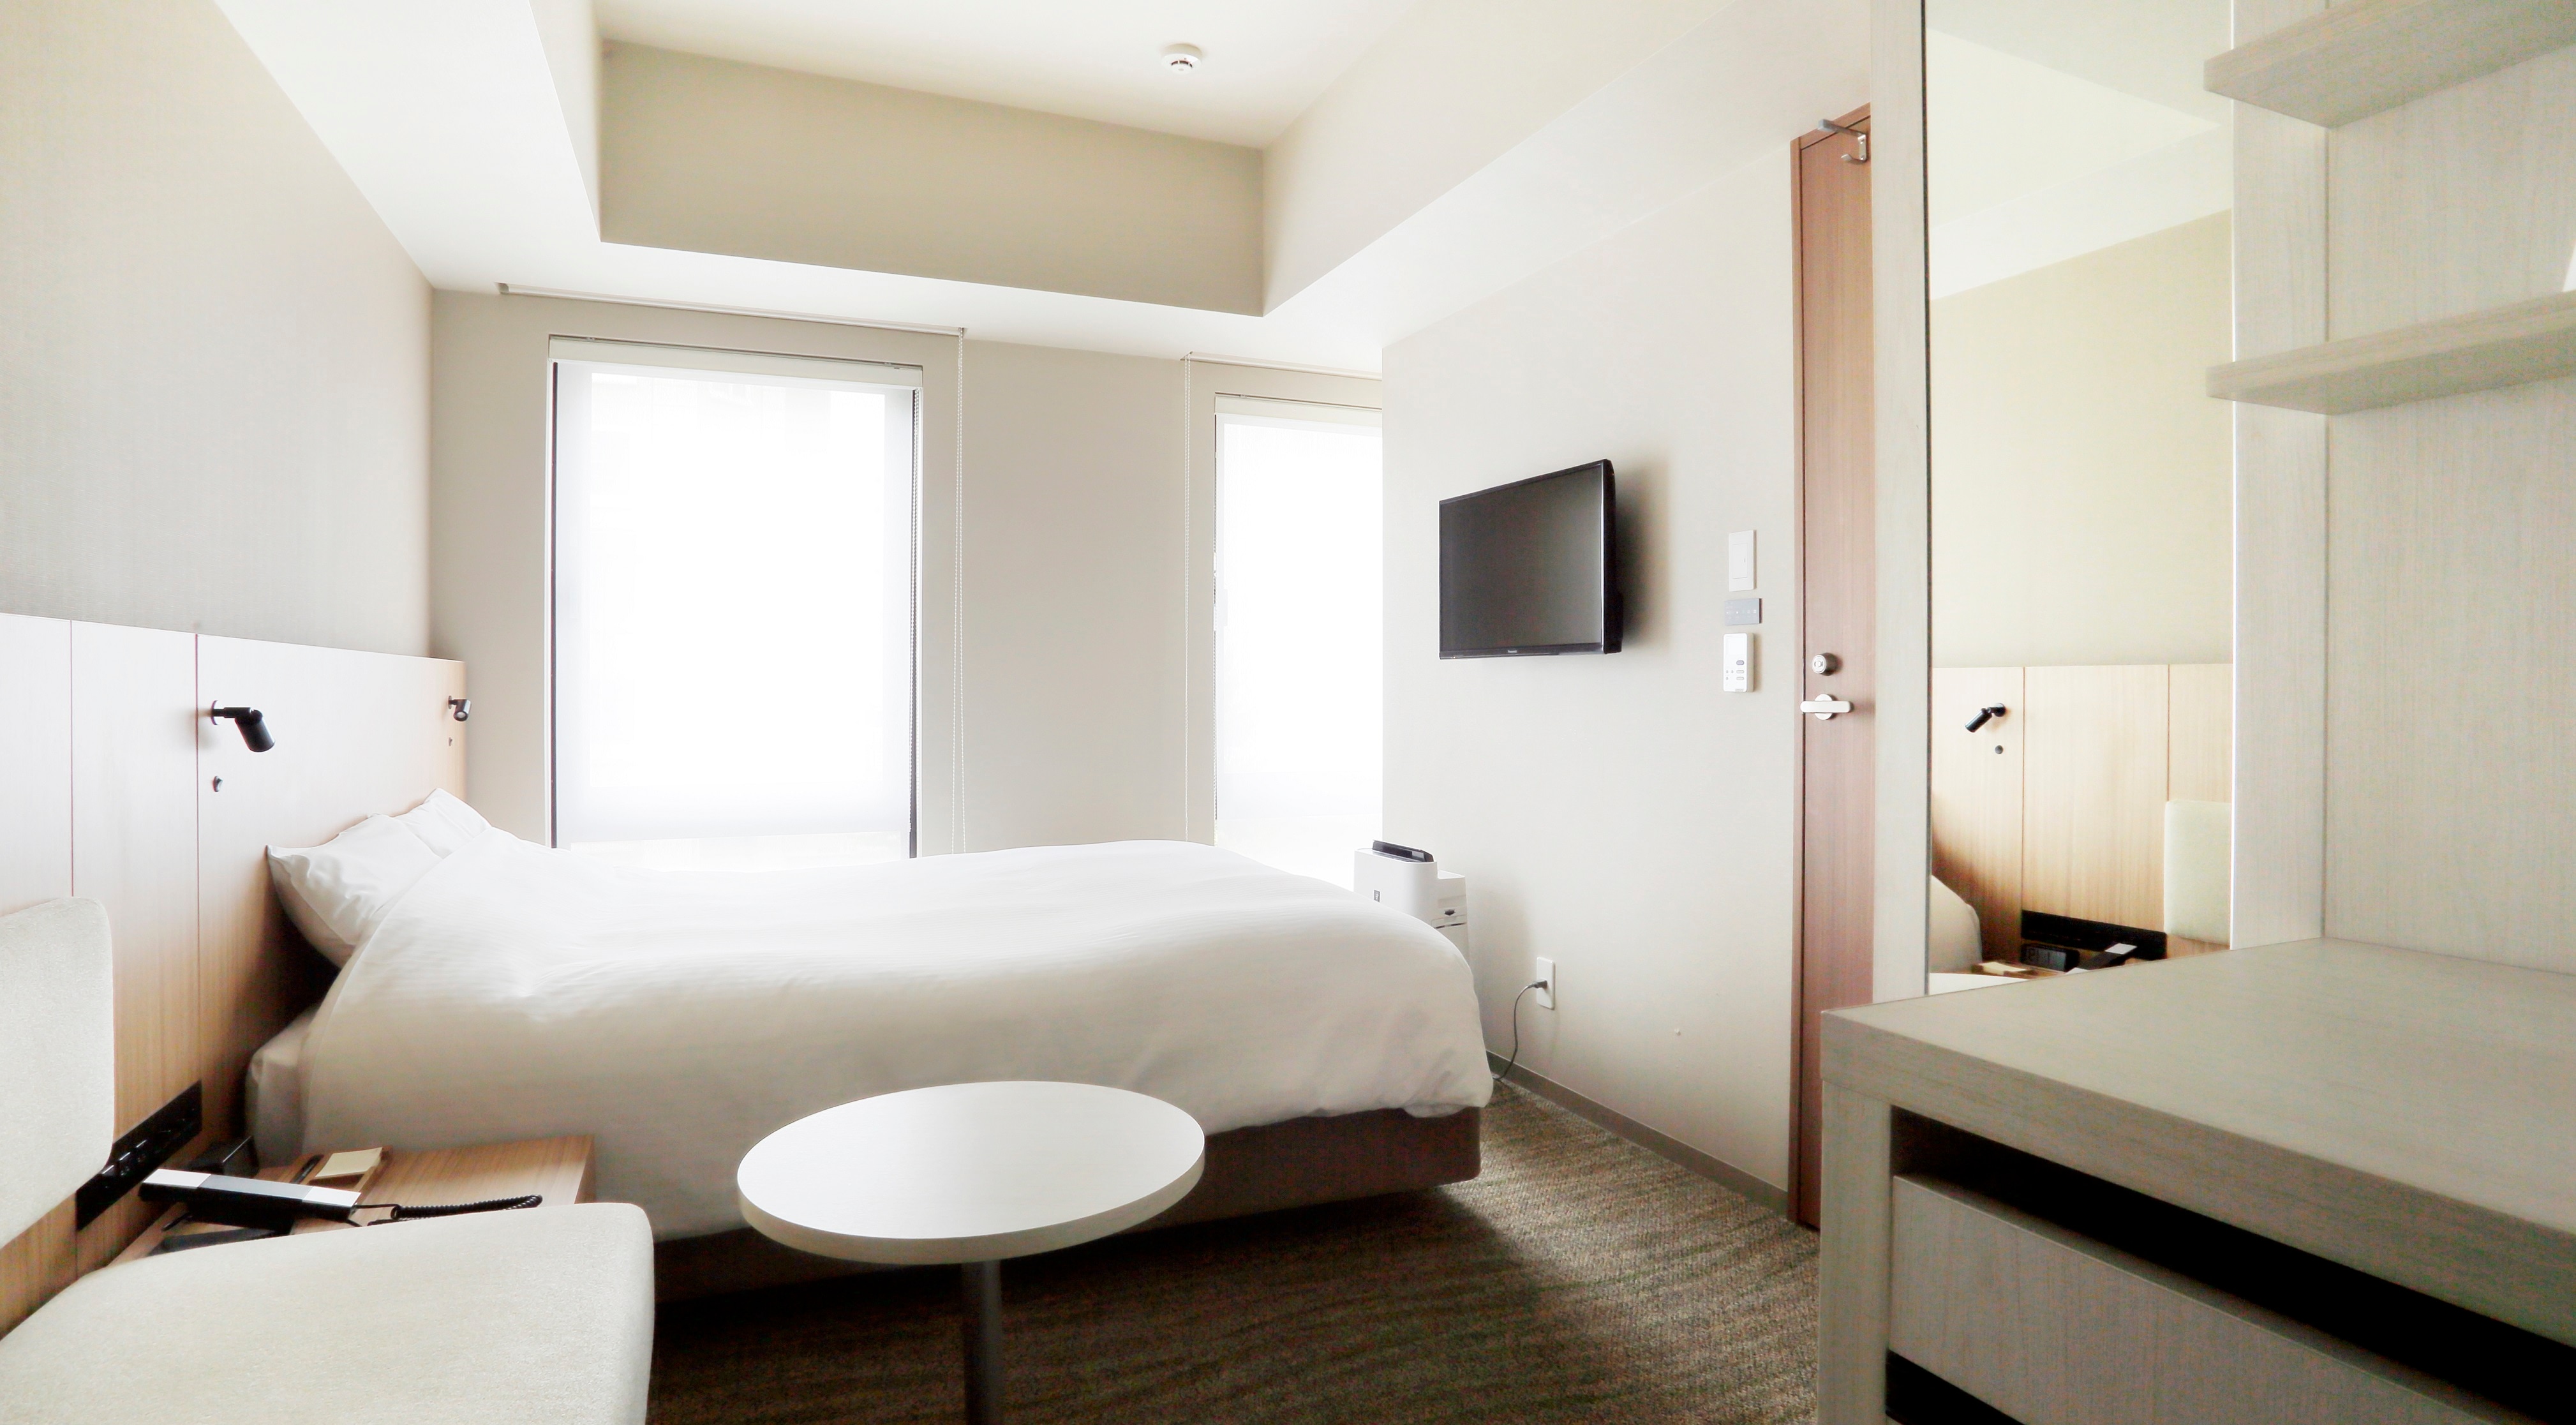 ■ Double room 17㎡ ■ In addition to full facilities, a 160cm wide bed is available. It is a room that can be used by one person.